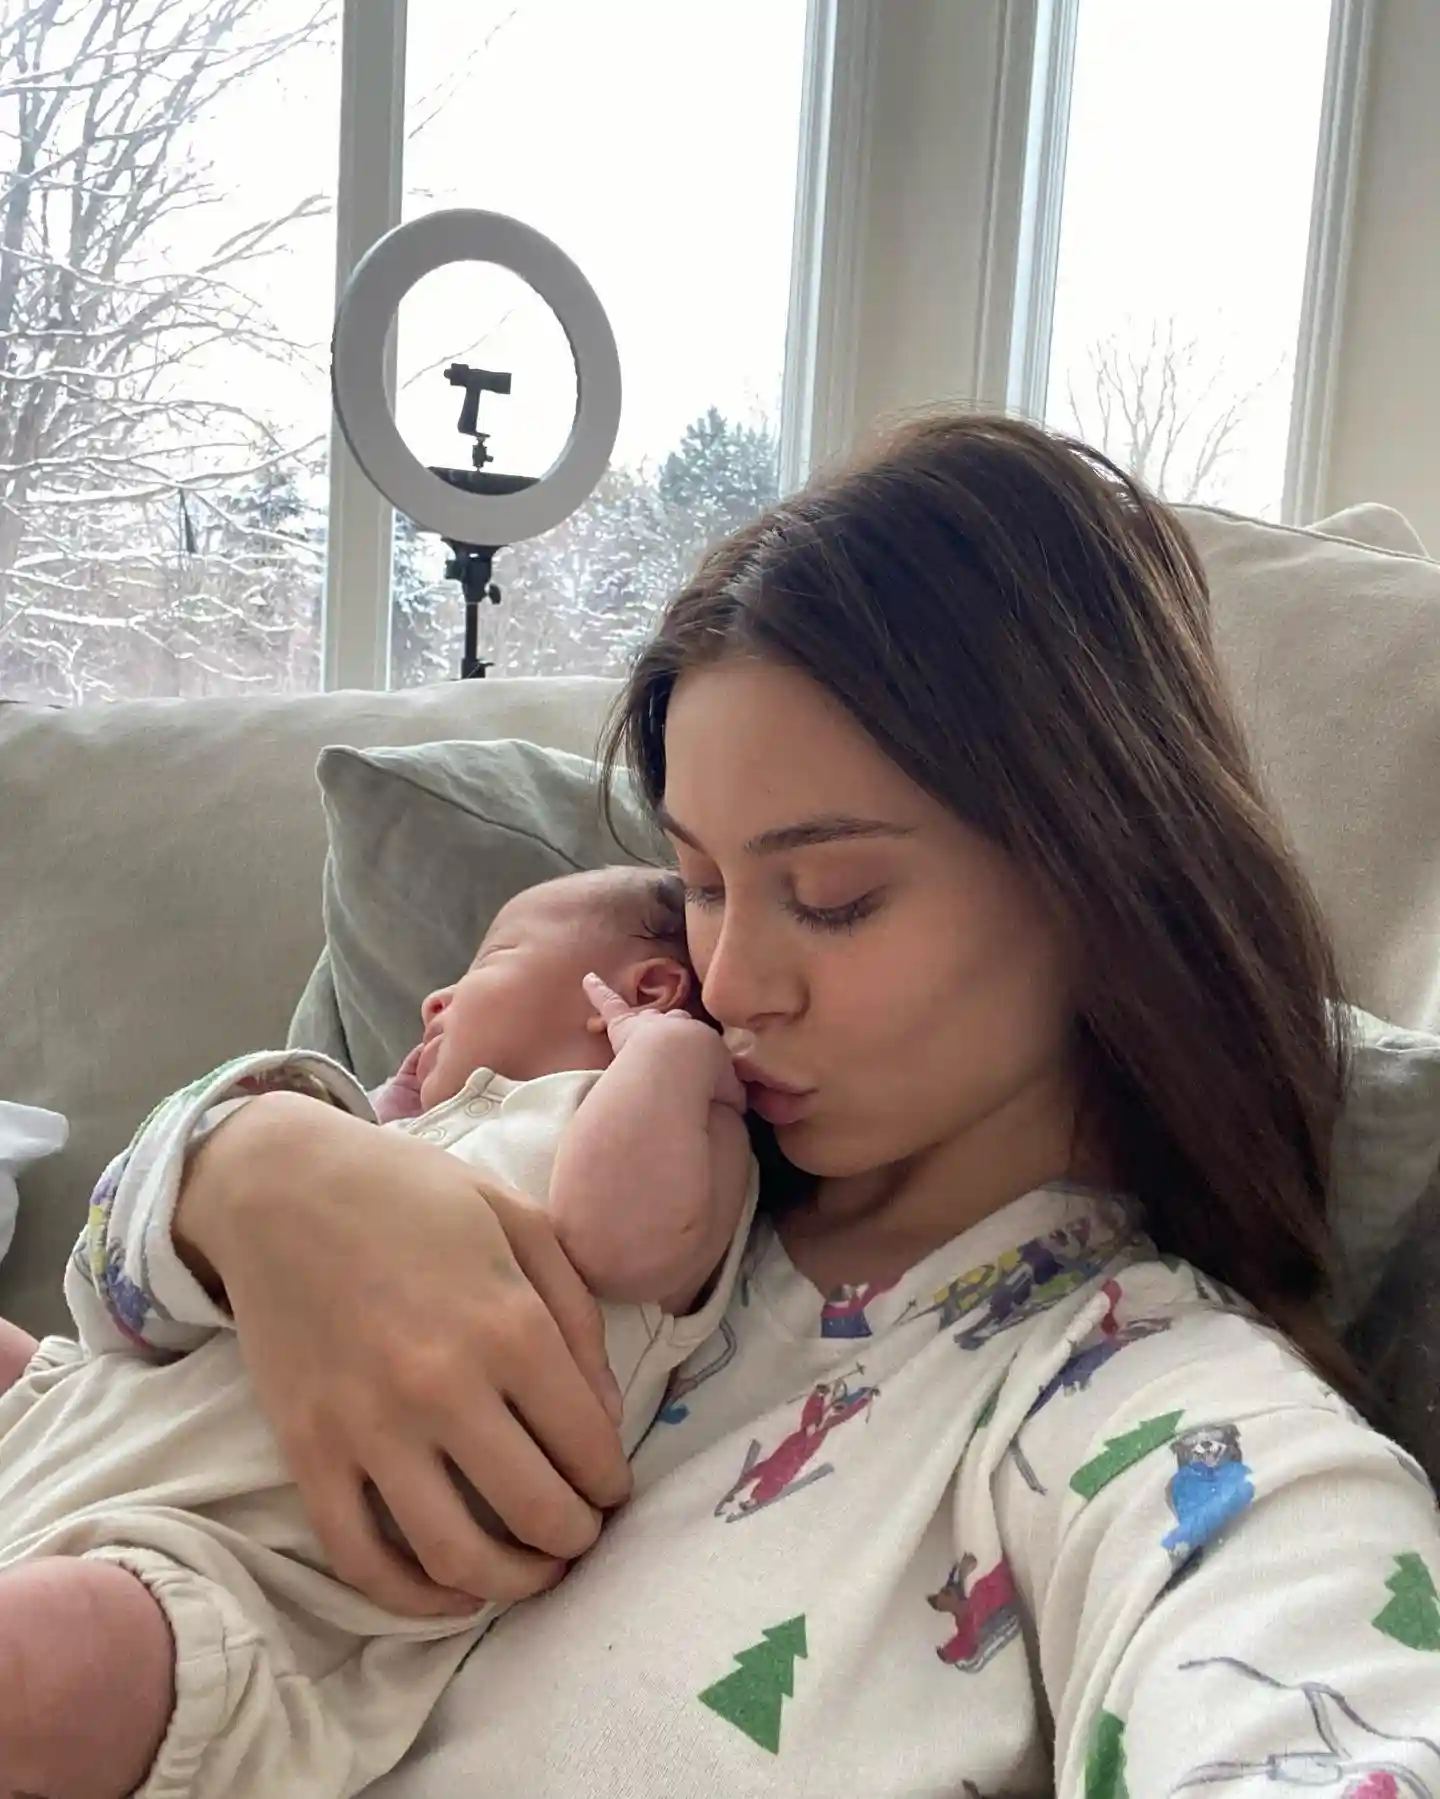 Lana Rhoades with her baby